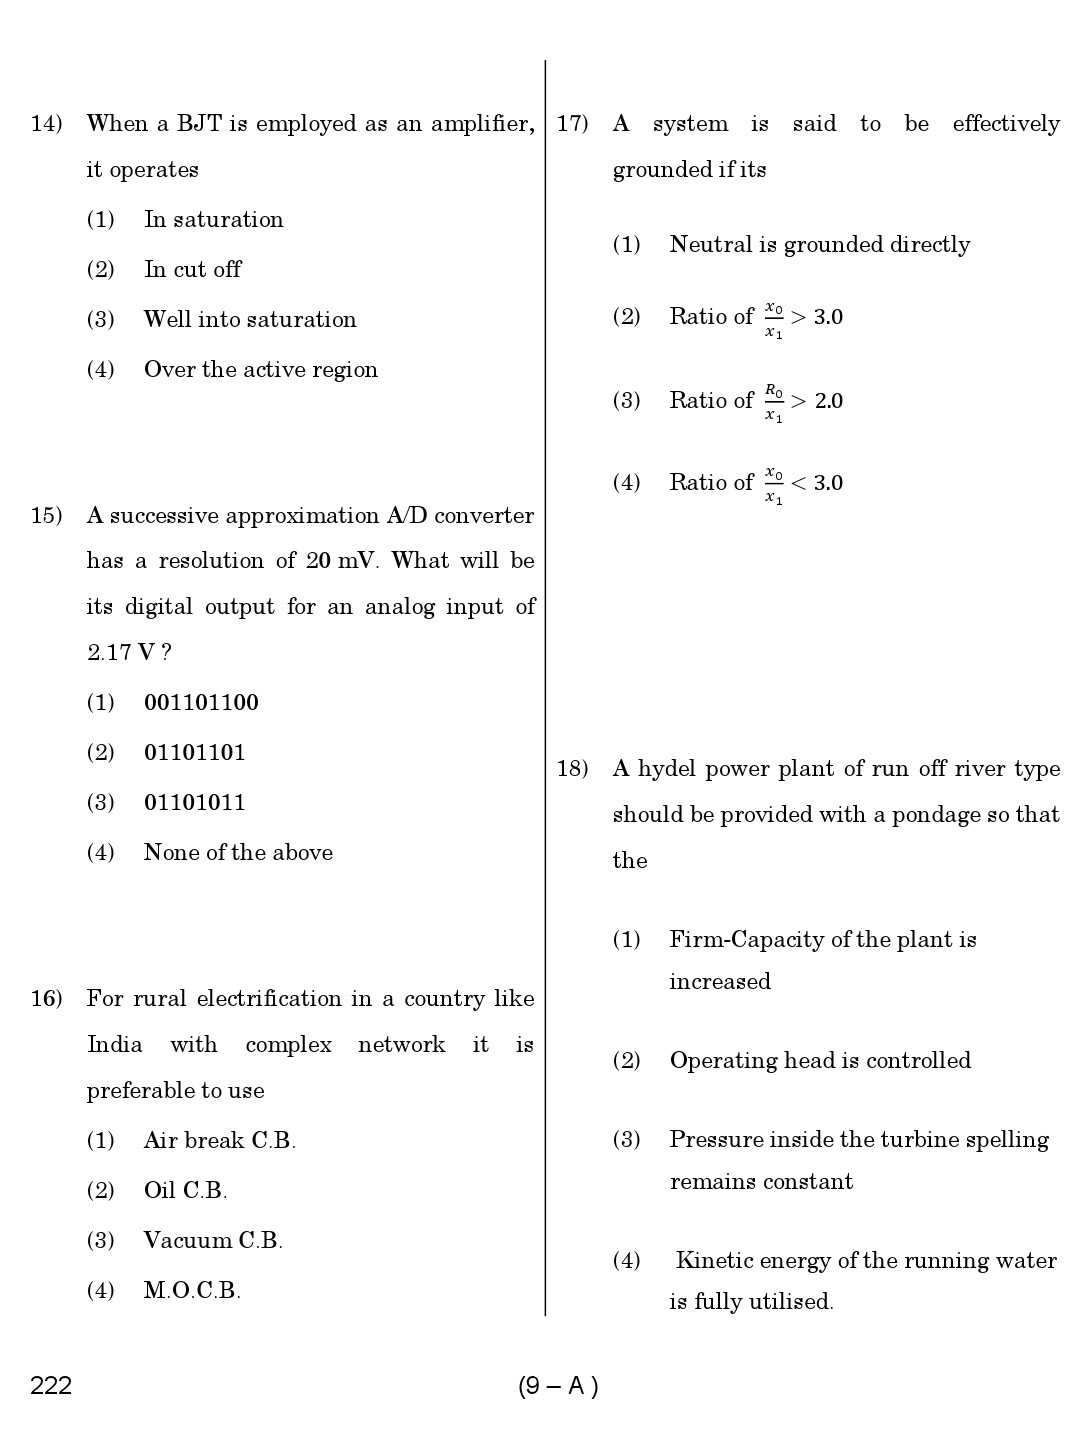 Karnataka PSC Assistant Engineer Electrical Exam Sample Question Paper 9